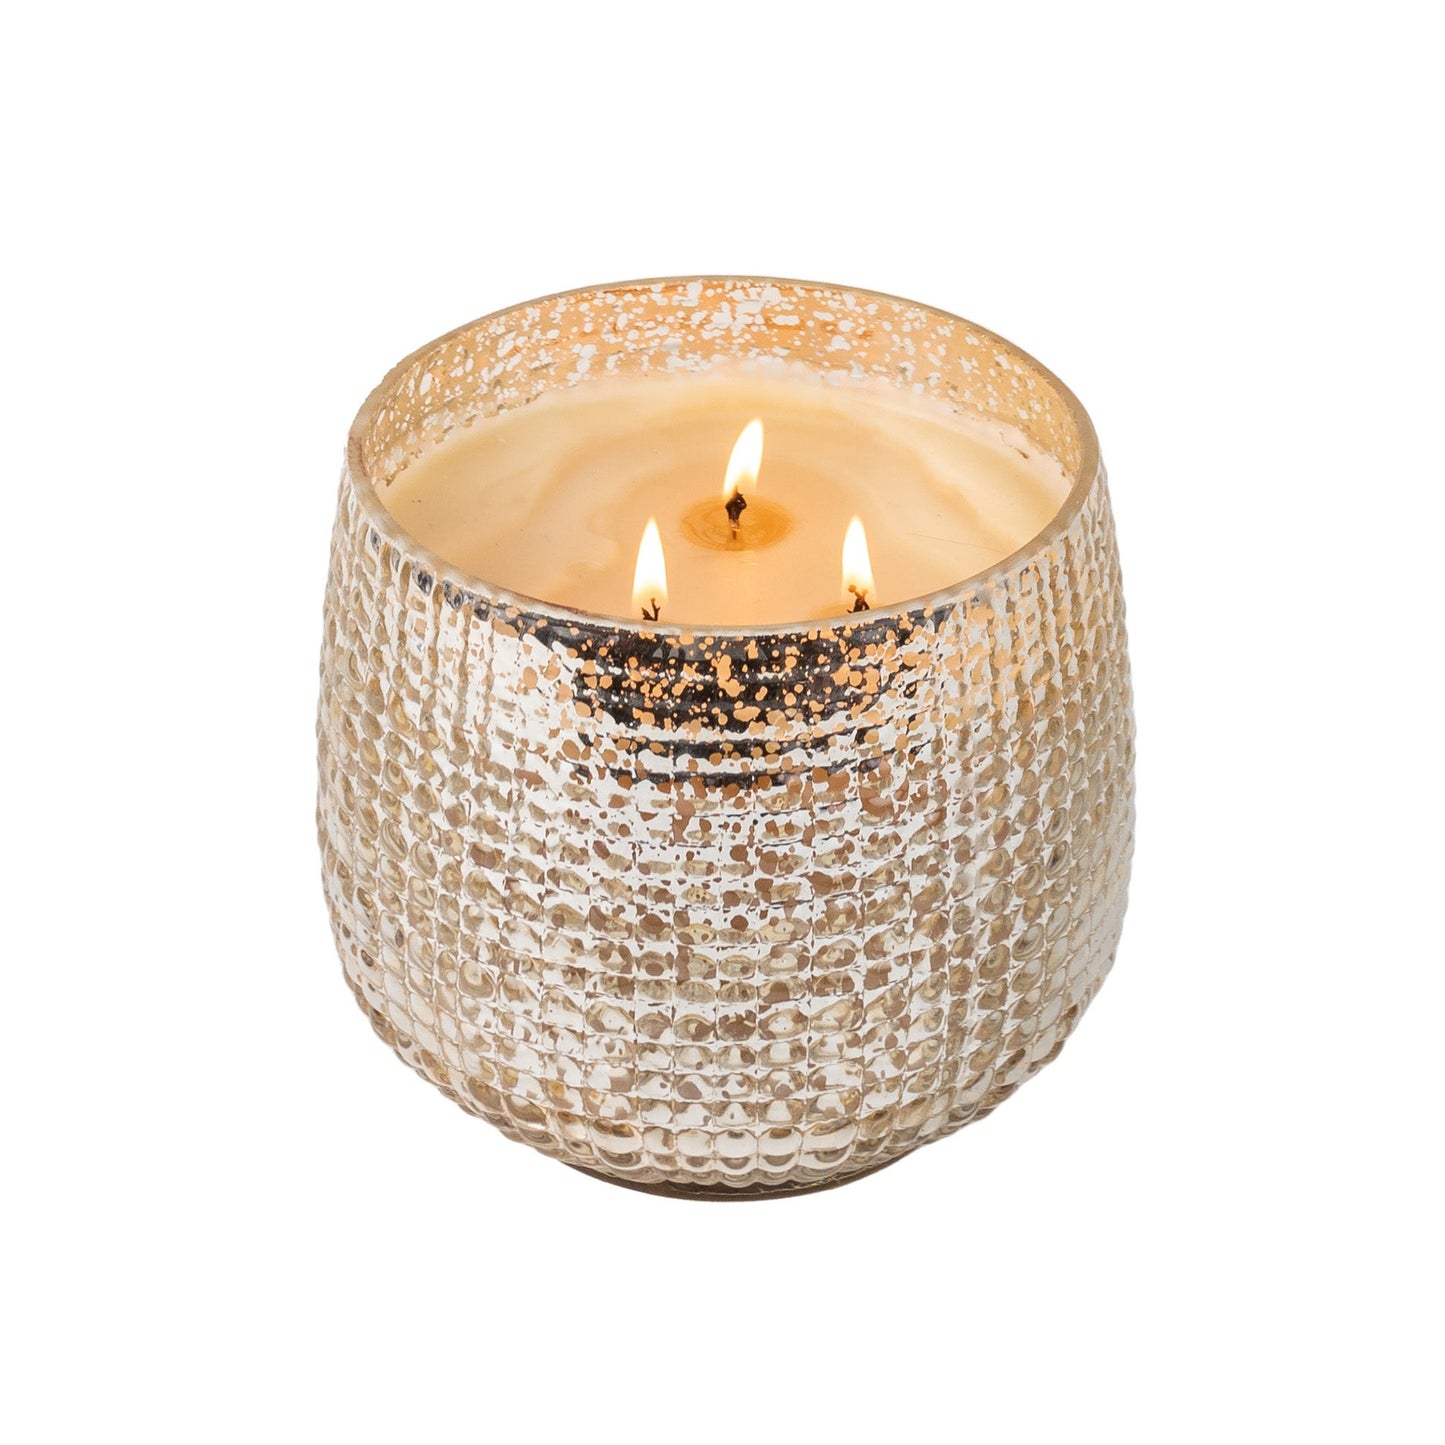 Bridgewater Candles "Sweet Grace" Collection Candle #051